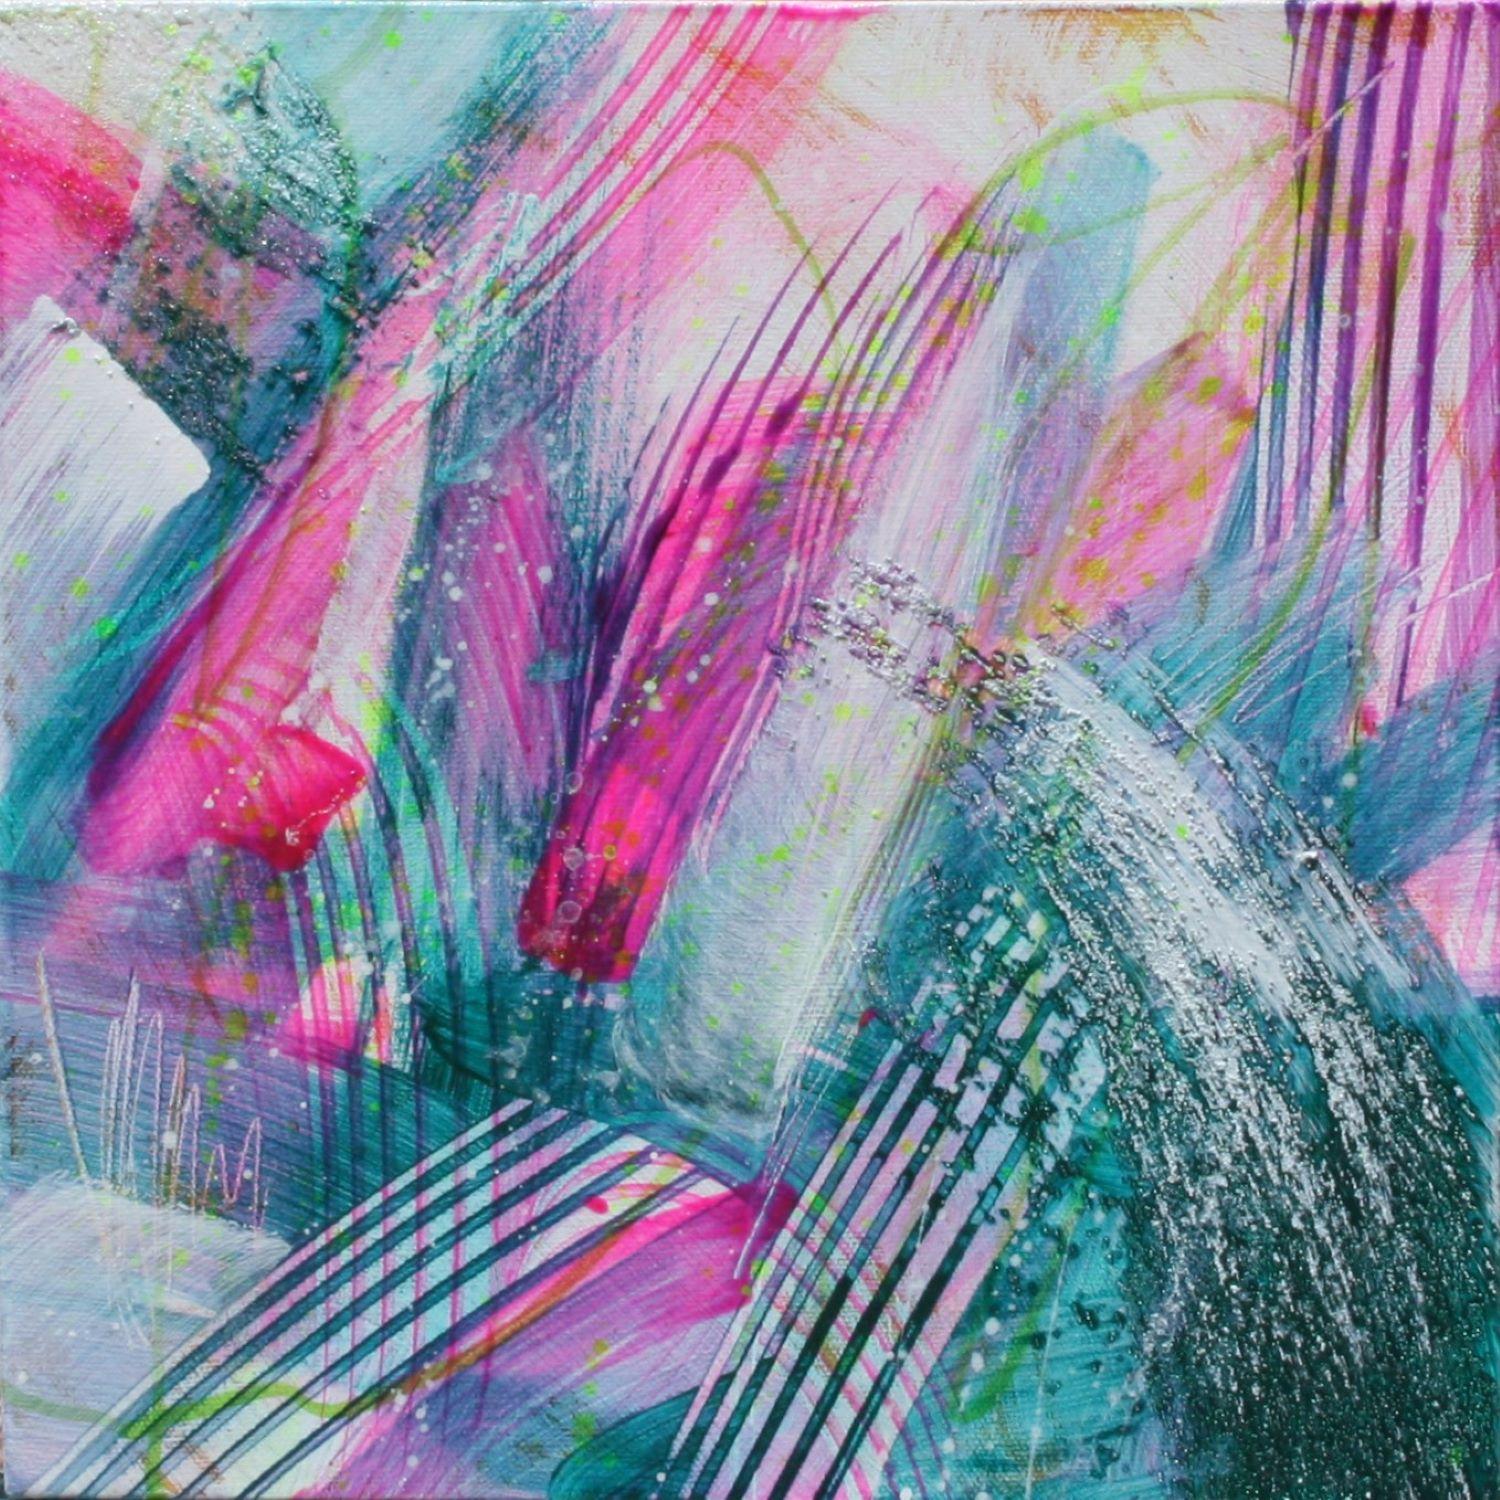 <p>Artist Comments<br>Artist Courtney Jacobs presents a lively abstract with sweeping and swerving colors. Inspired by playful, bright summer days, Courtney creates joyful applications of glowing pink balanced with cool teal. A cheerful energy